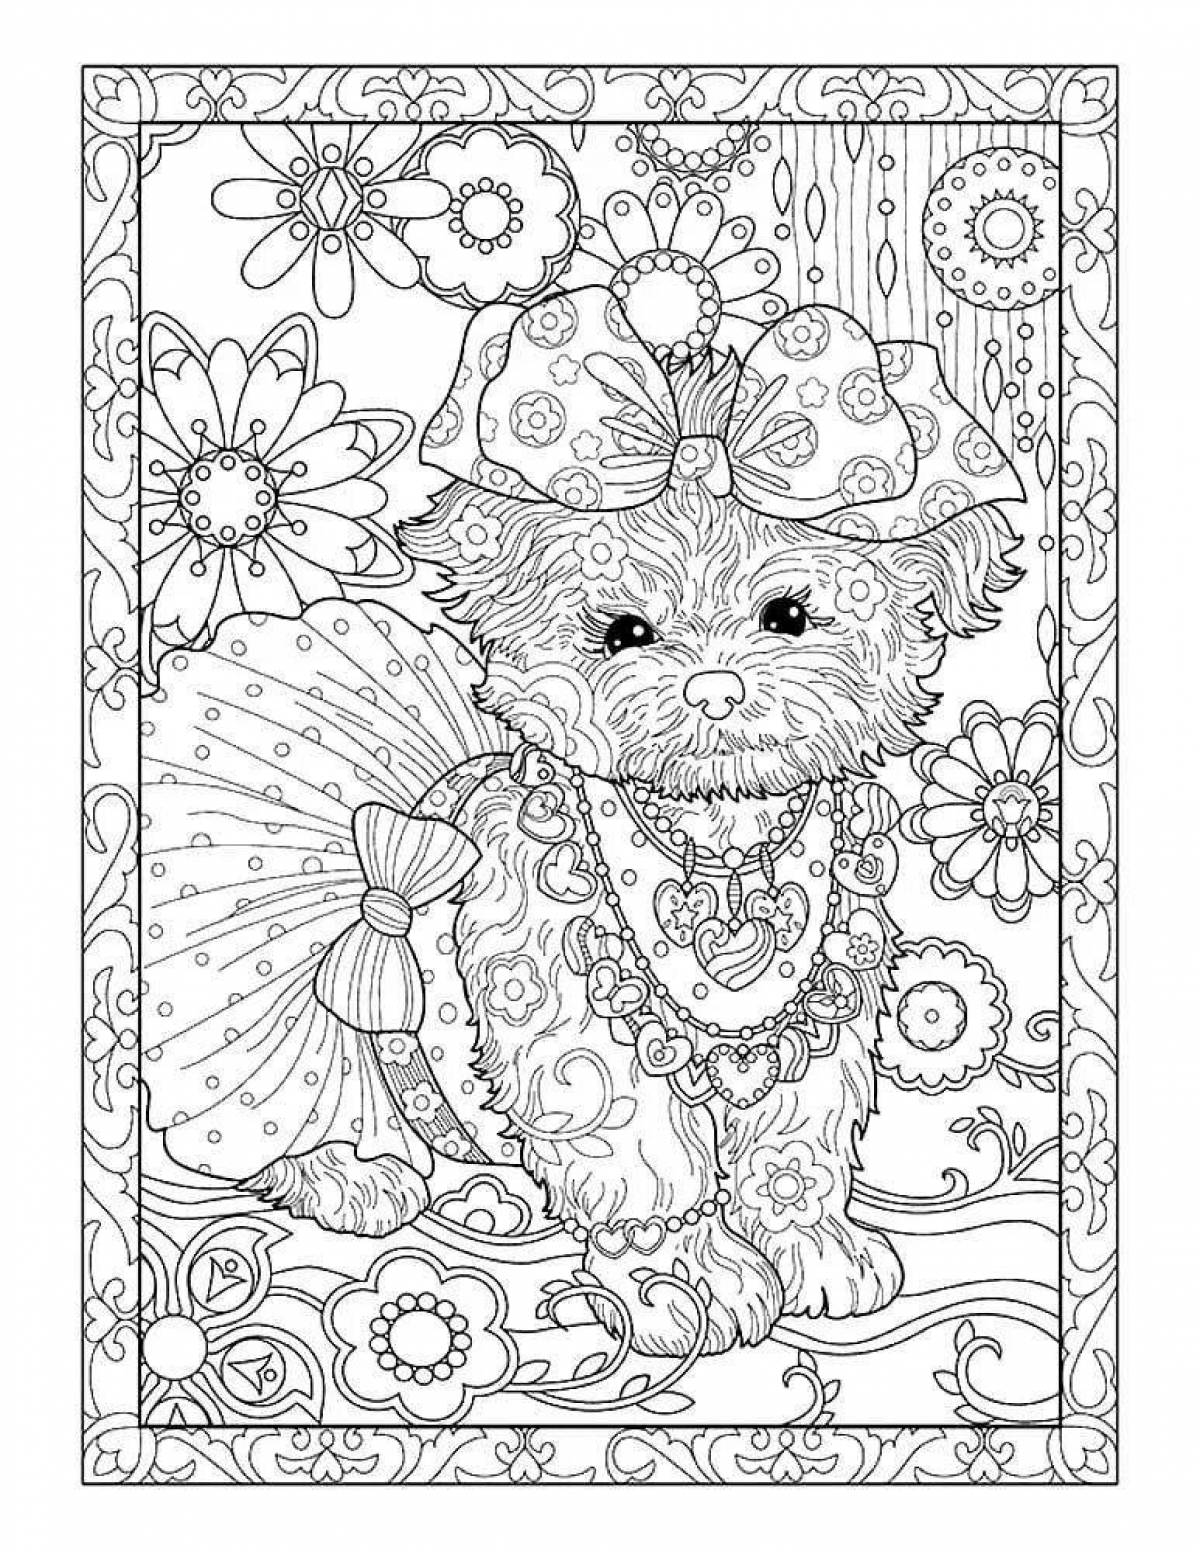 Charming coloring book for girls 11 years old with animals